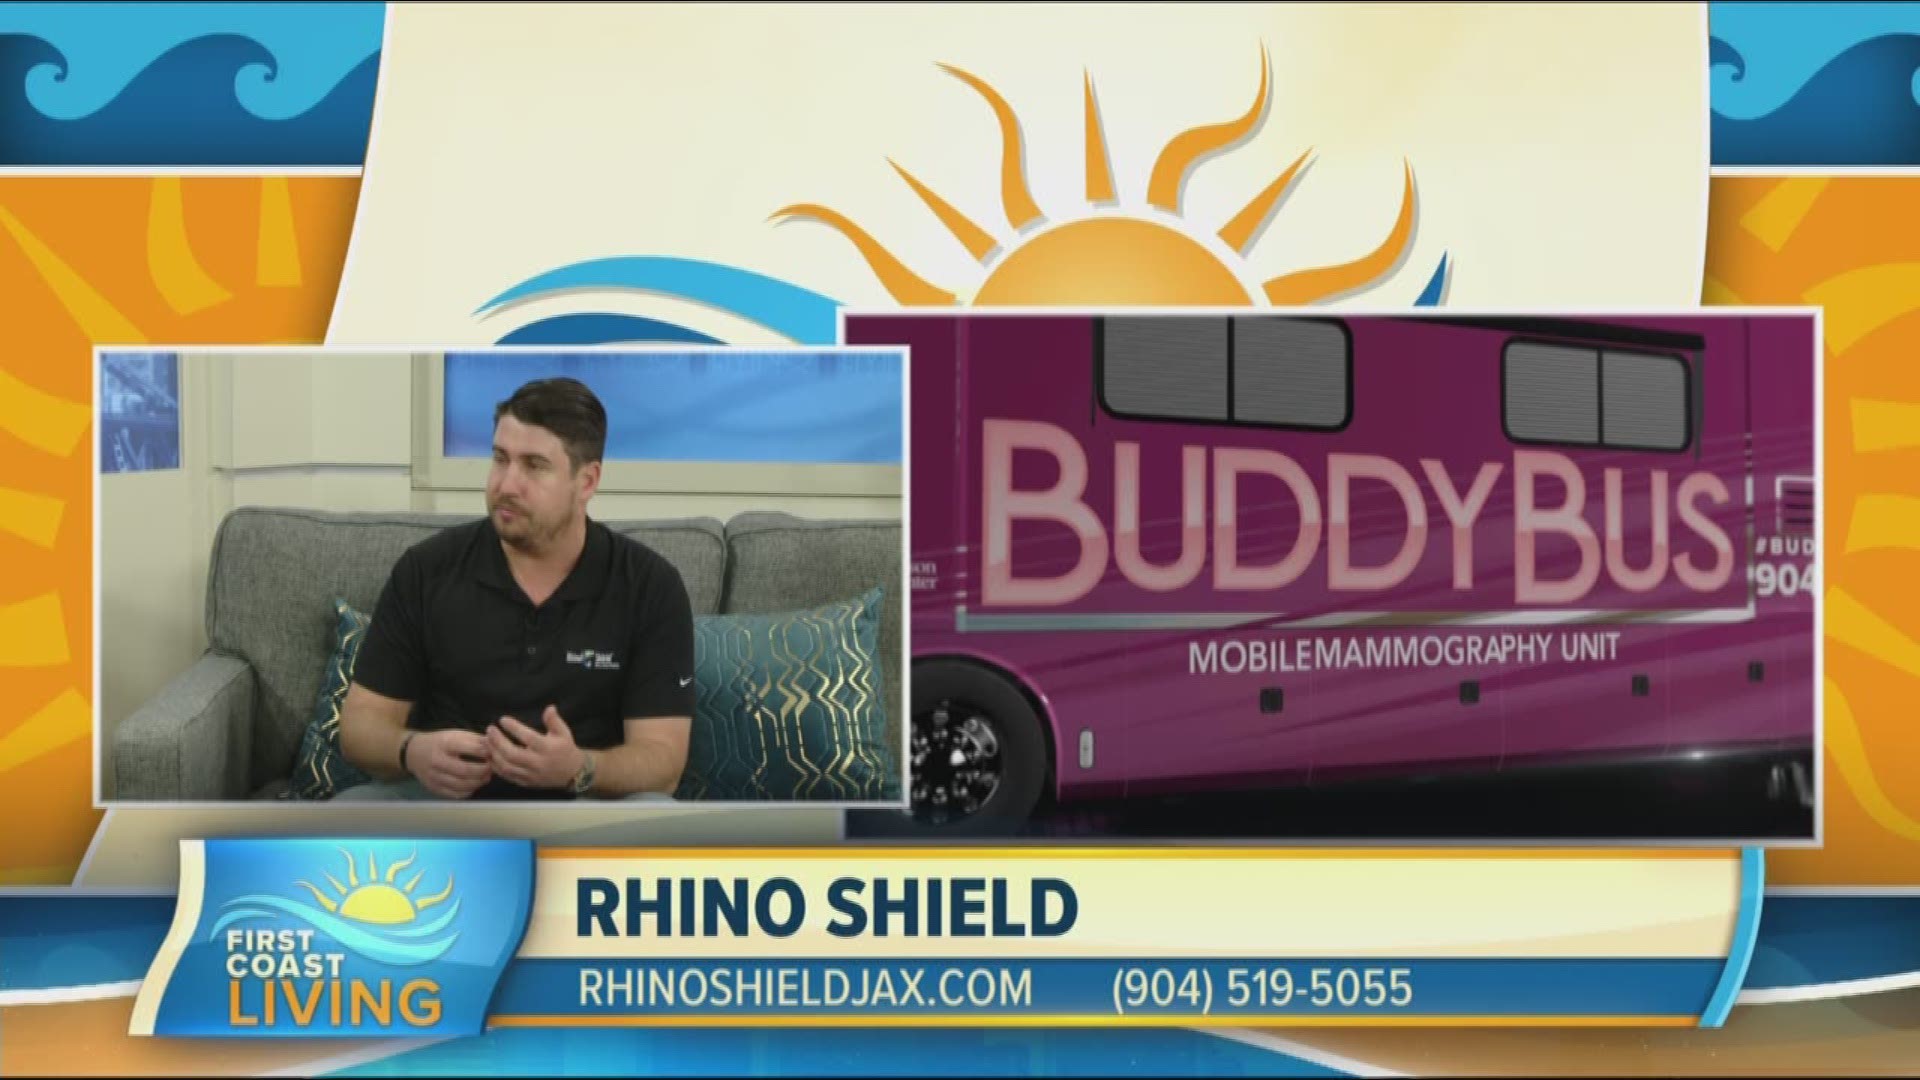 $500 per Rhino Shield sale will be donated to the Buddy Bus.